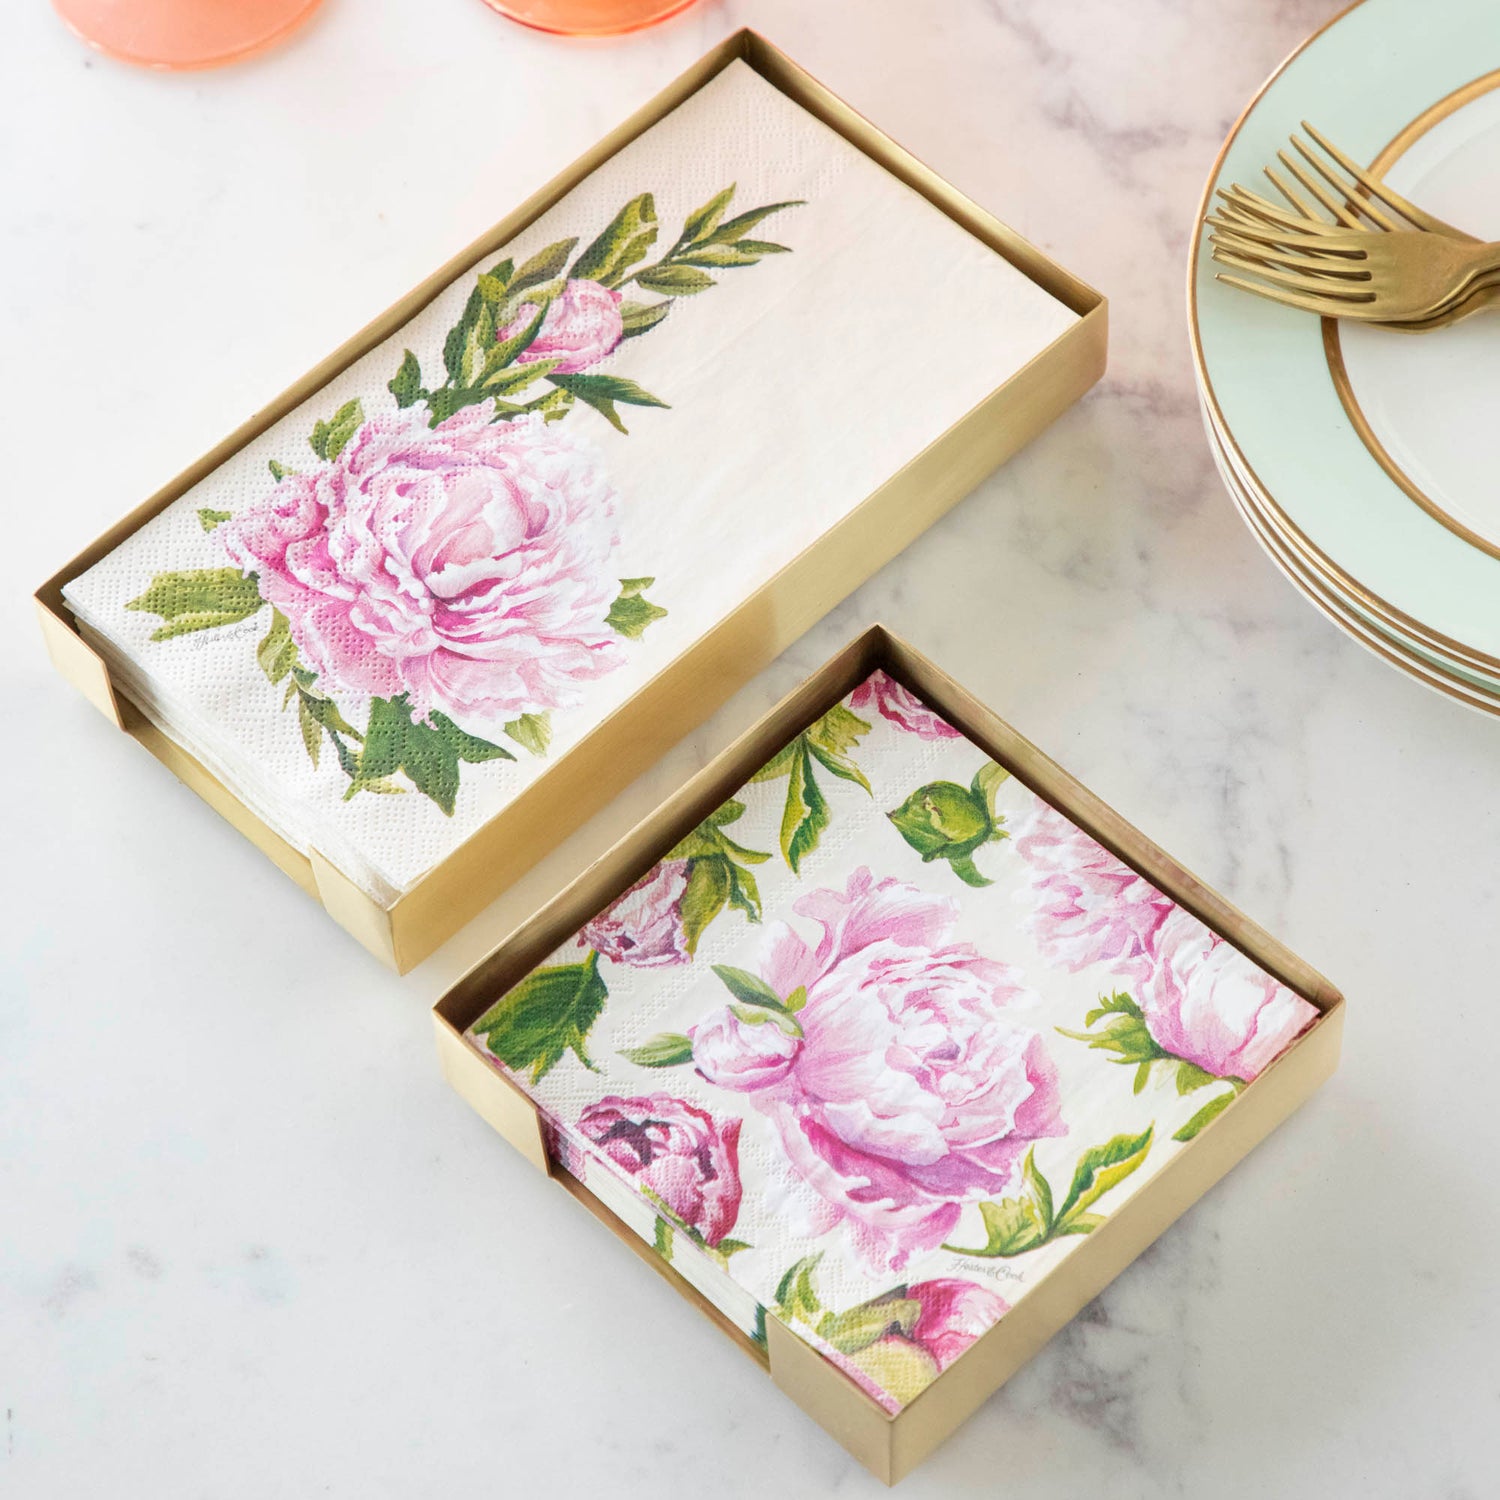 Two Brass Napkin Holders, guest-sized and cocktail-sized, containing pink floral napkins on a white table.